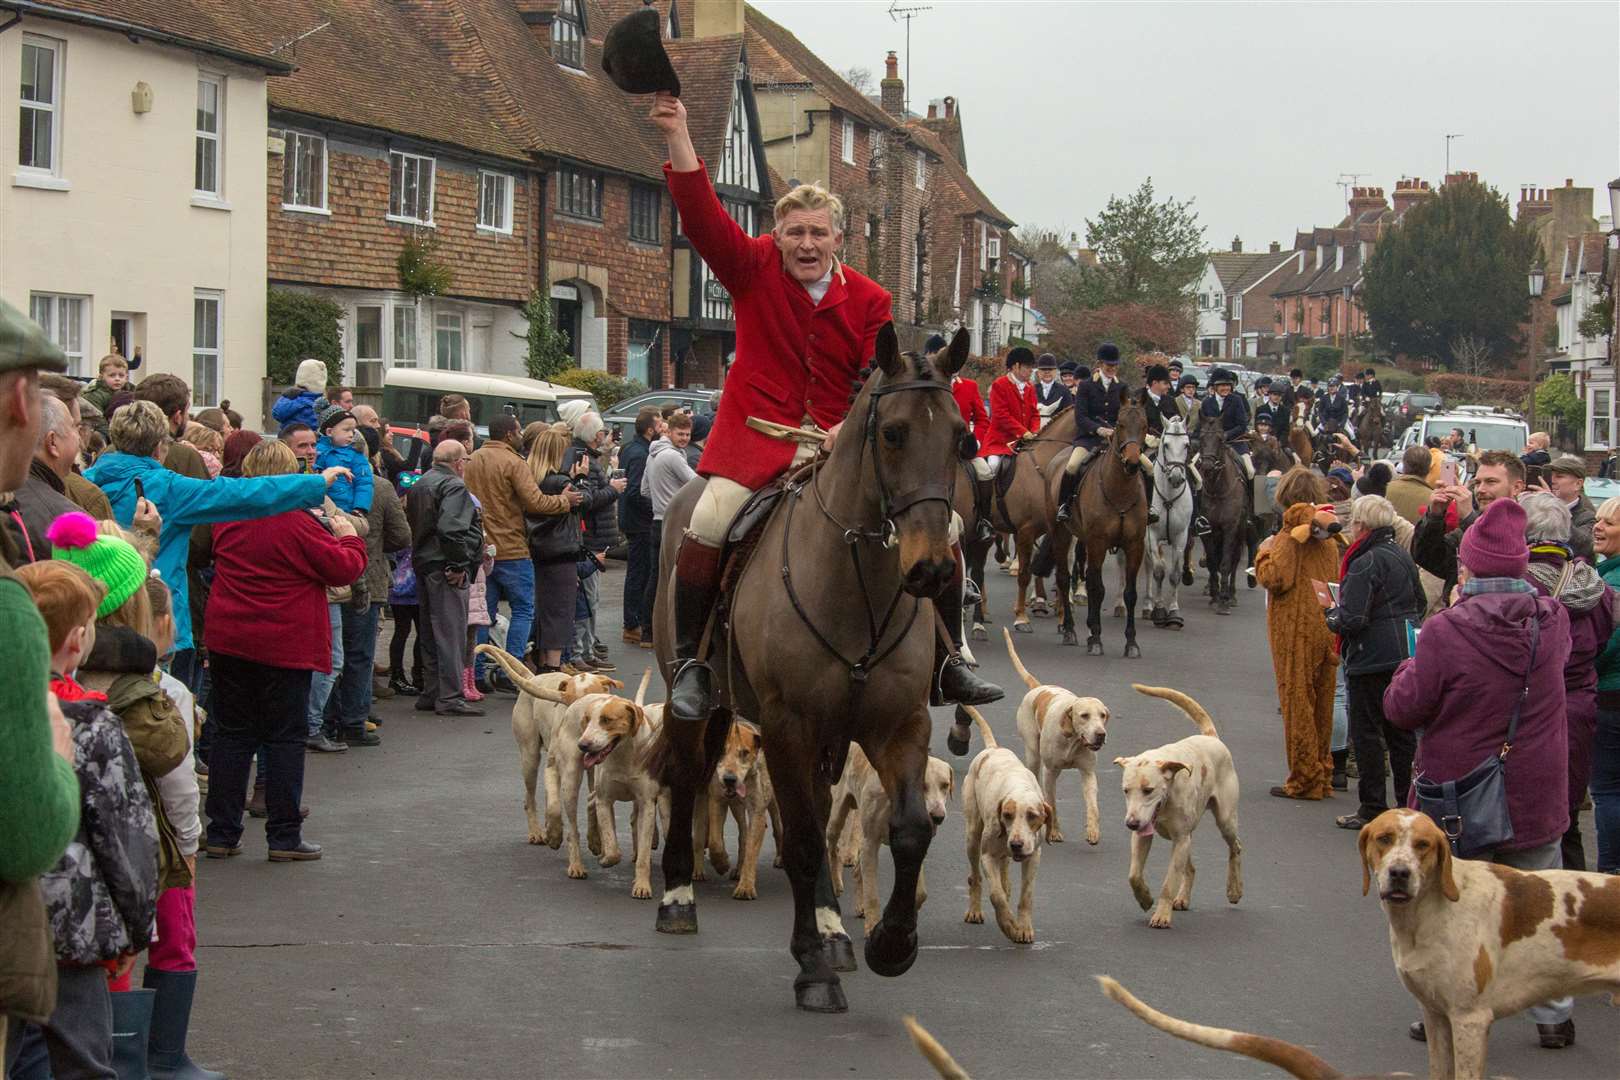 Spectators and riders attend the Boxing Day hunt in Elham, 2018. Picture: Nick Onslow.